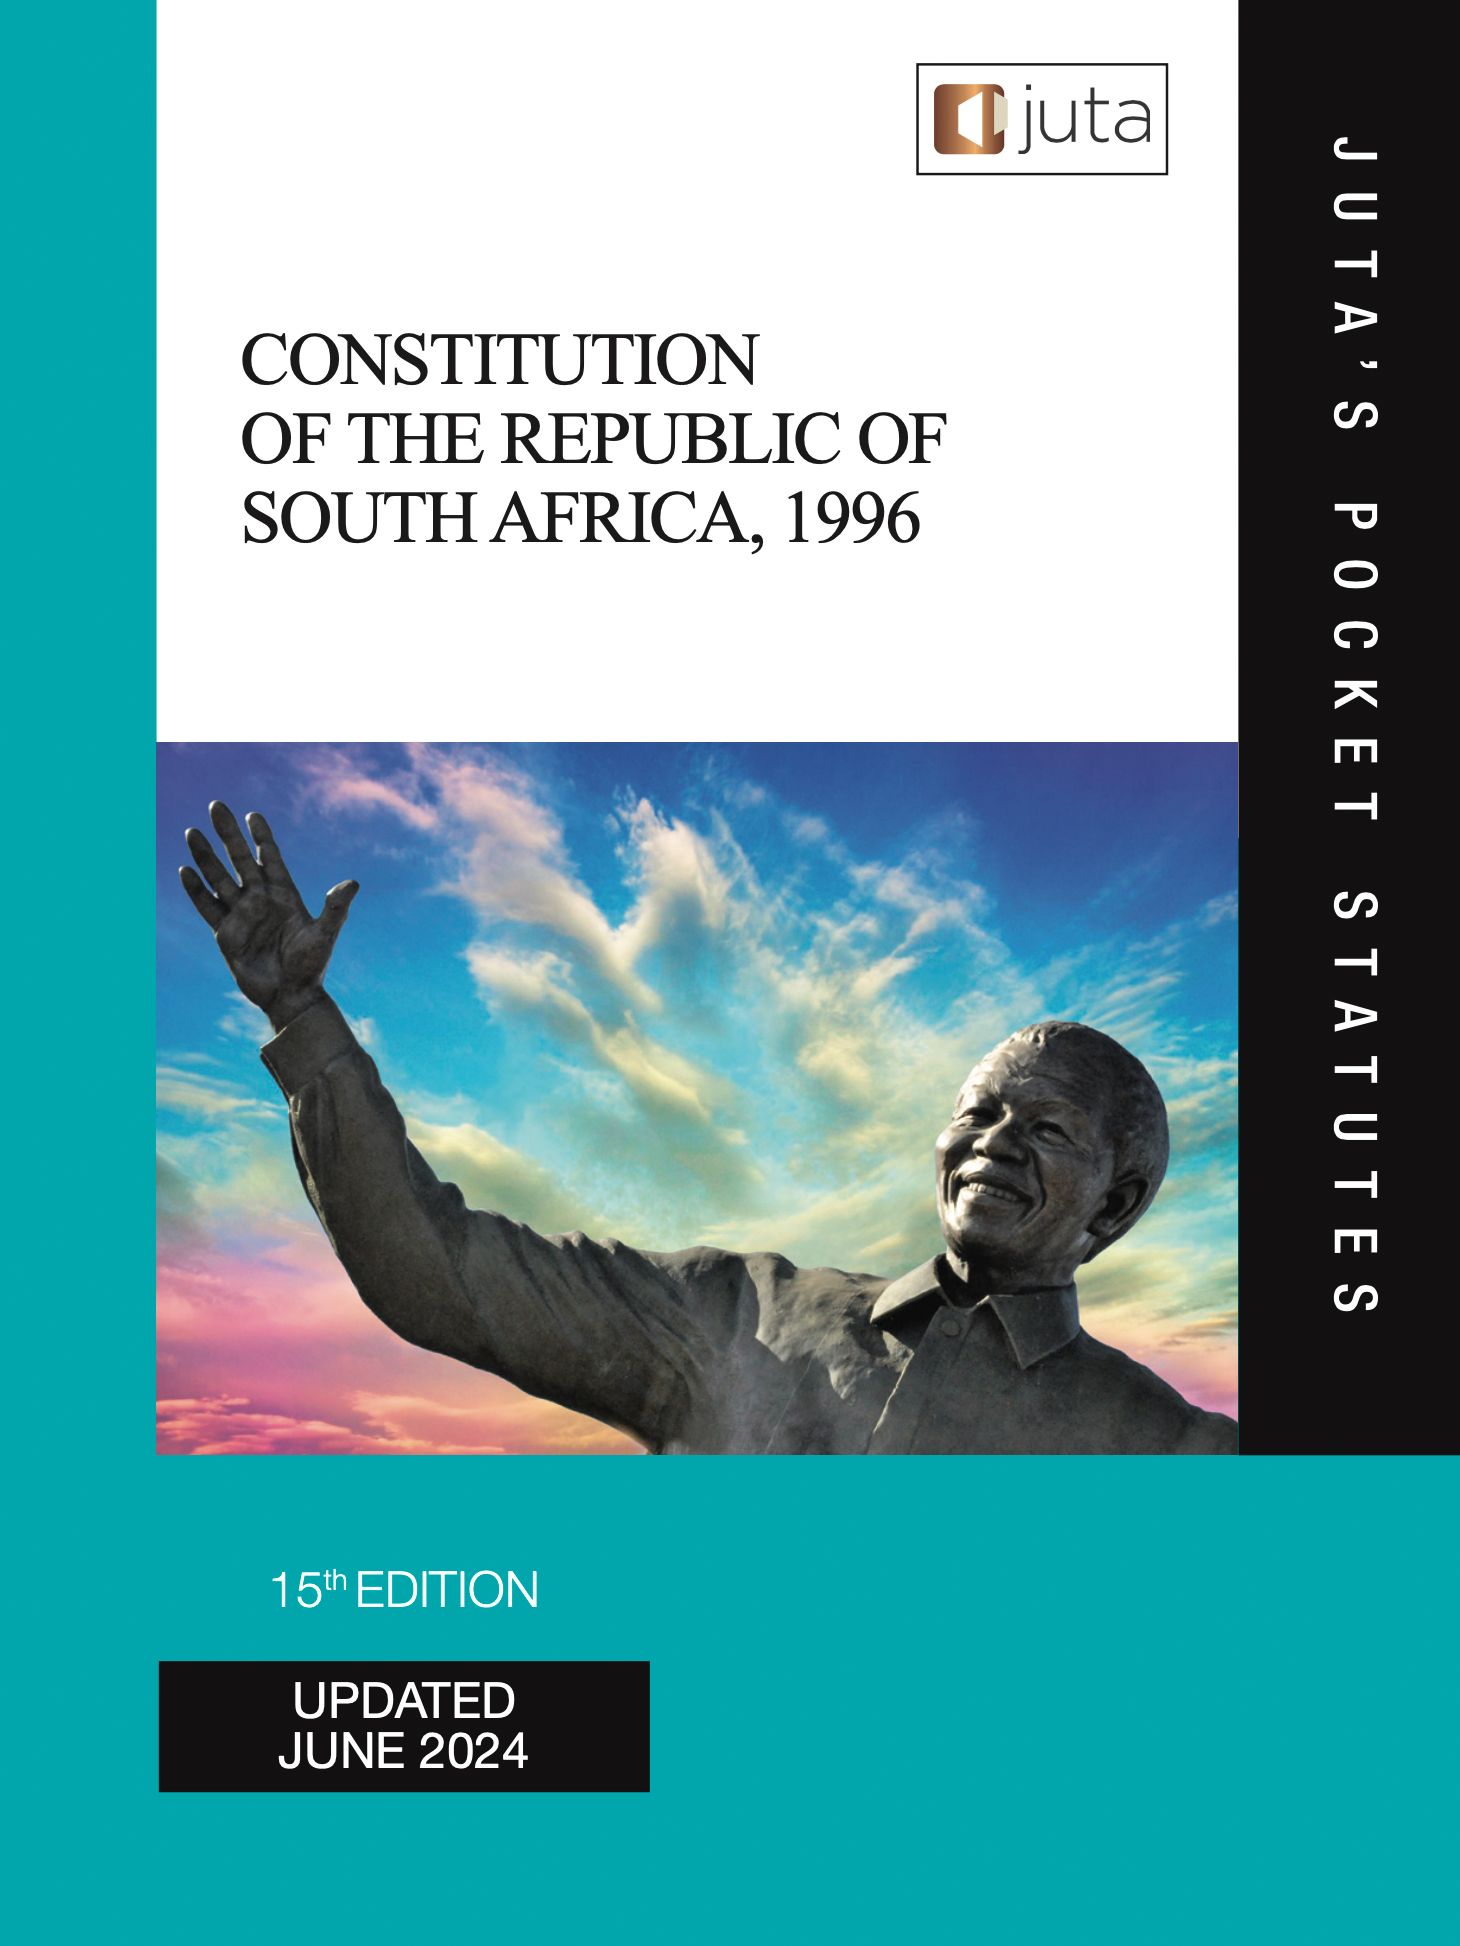 Constitution of the Republic of South Africa 1996